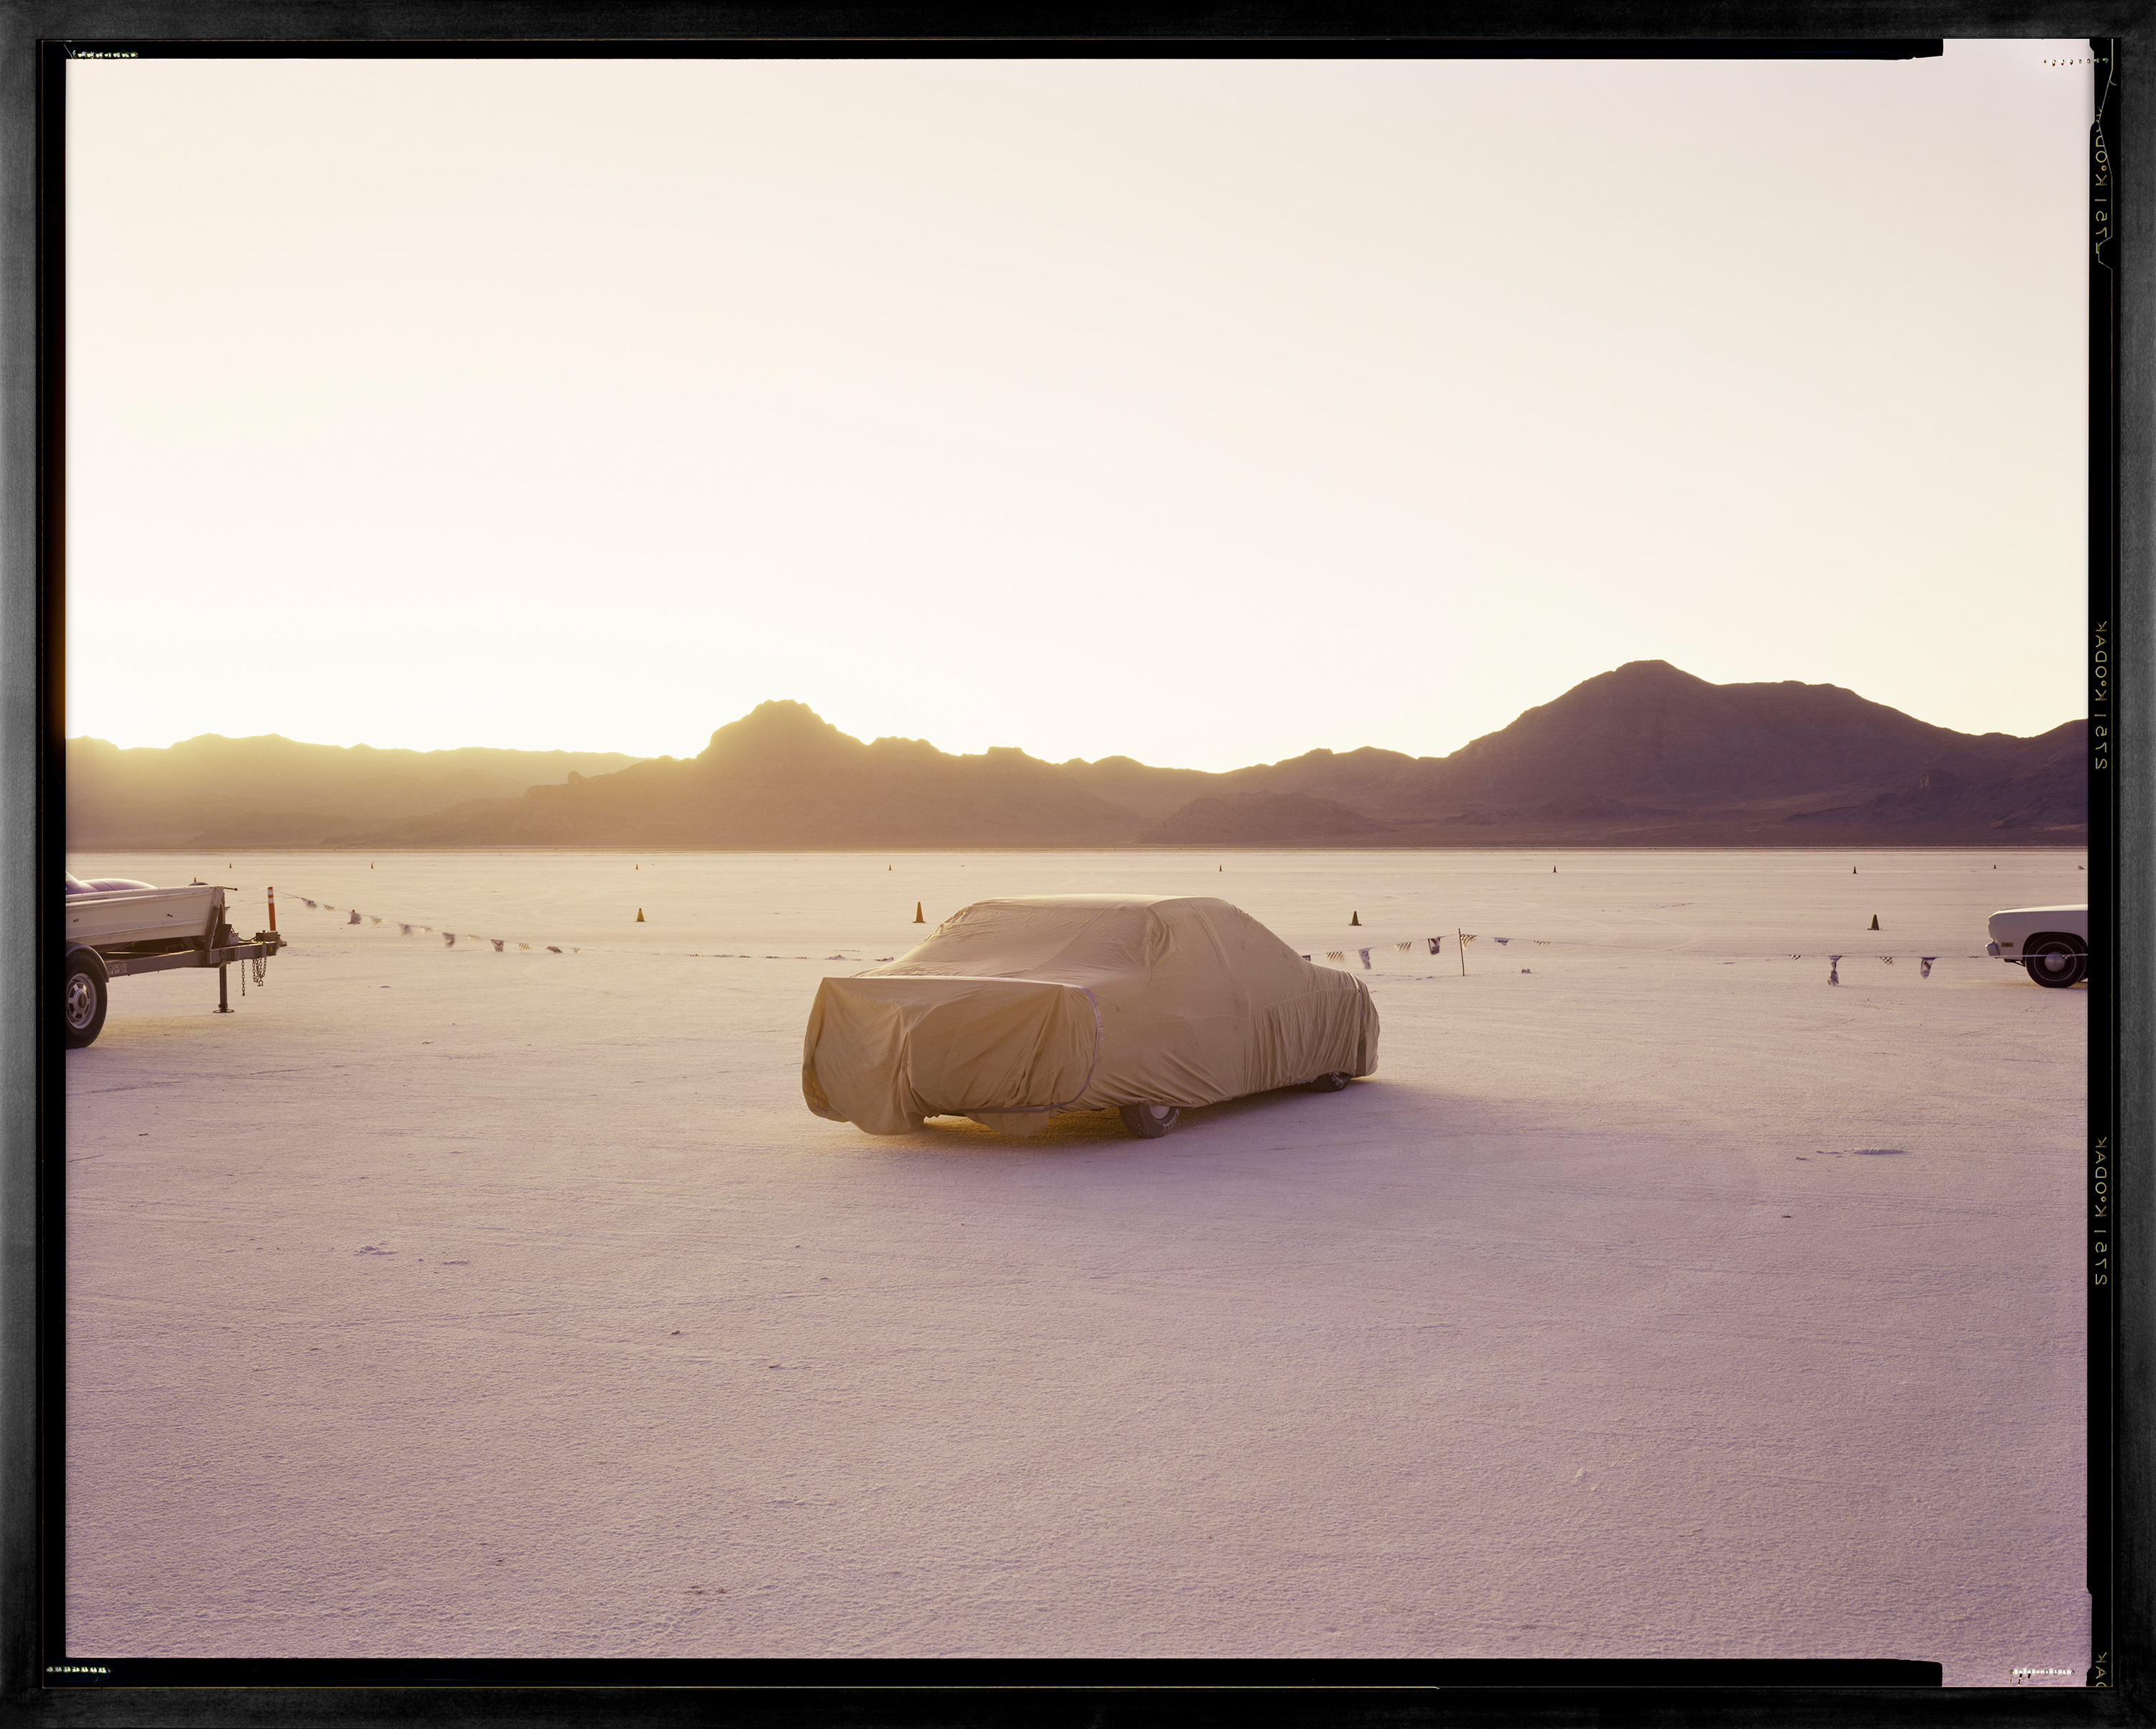 Color photograph framed in black depicting a covered car within the desert with sunlight breaking over mountains on the horizon